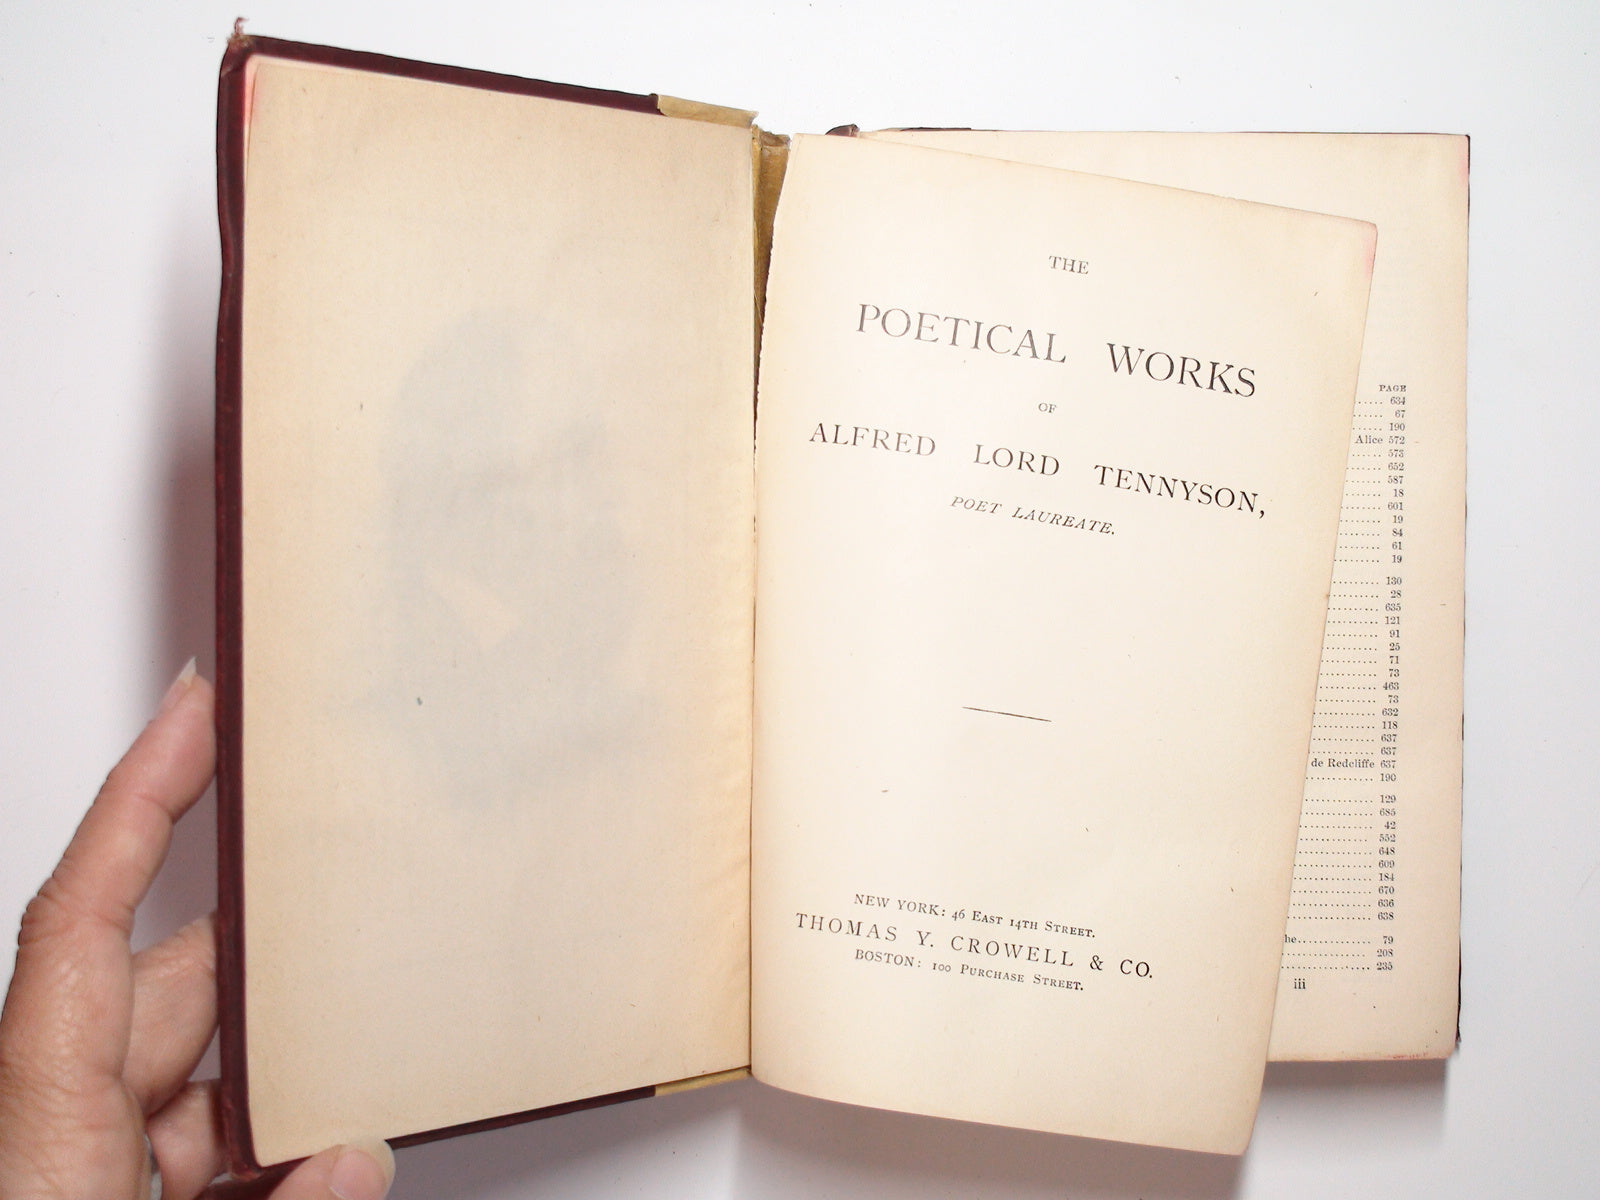 The Poetical Works of Alfred Lord Tennyson, Thomas Y. Crowell, c1890s